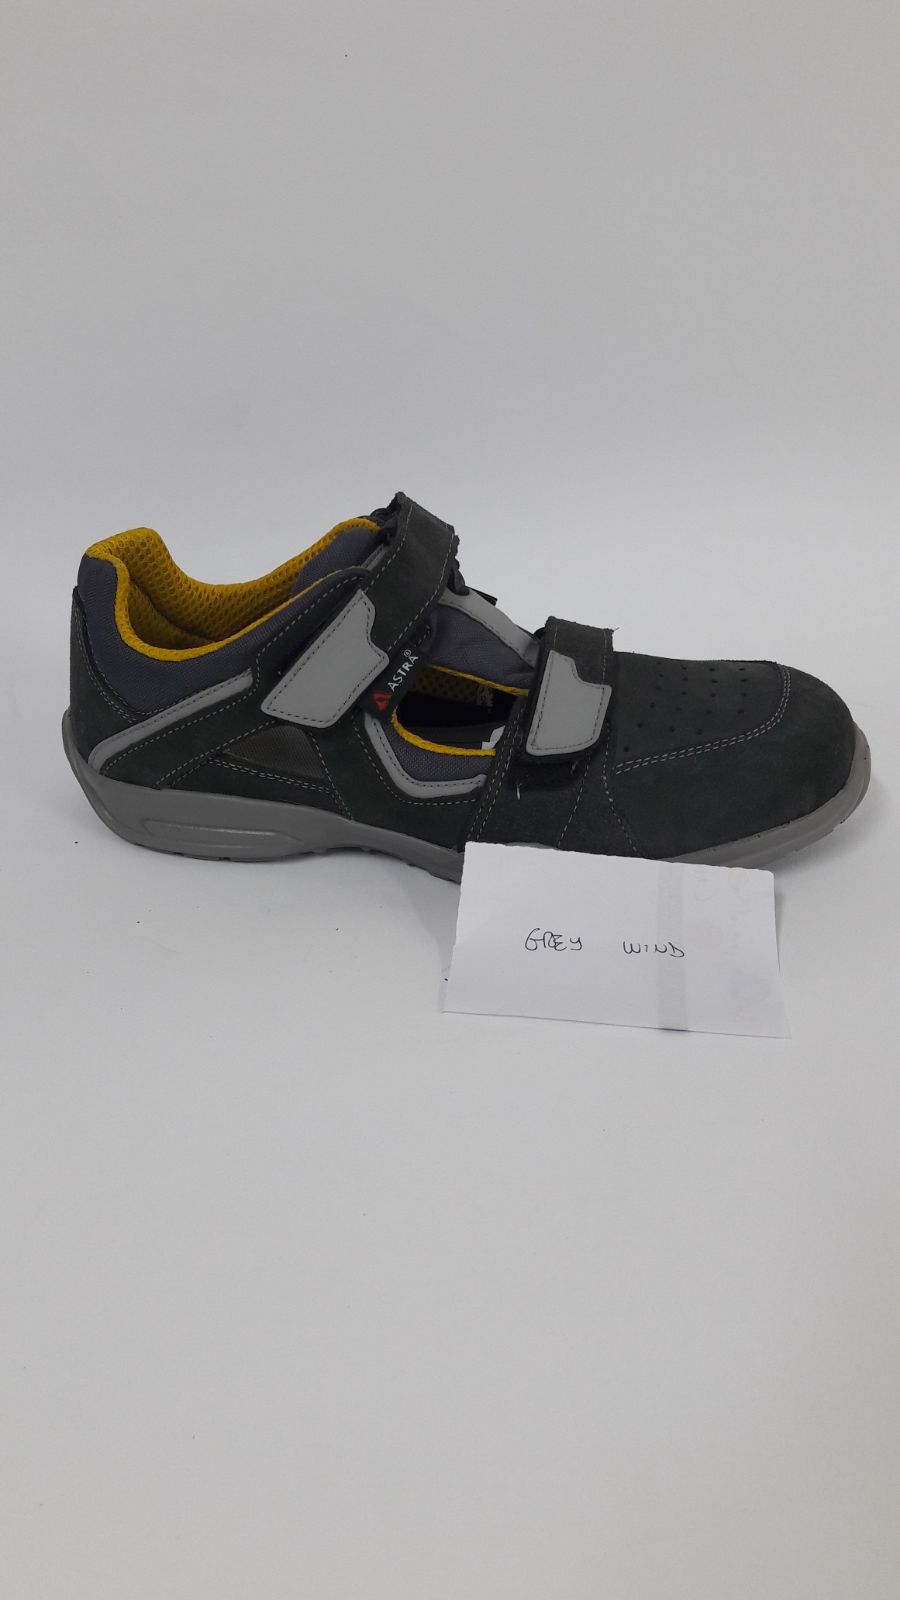 25014 - Safety shoes Europe